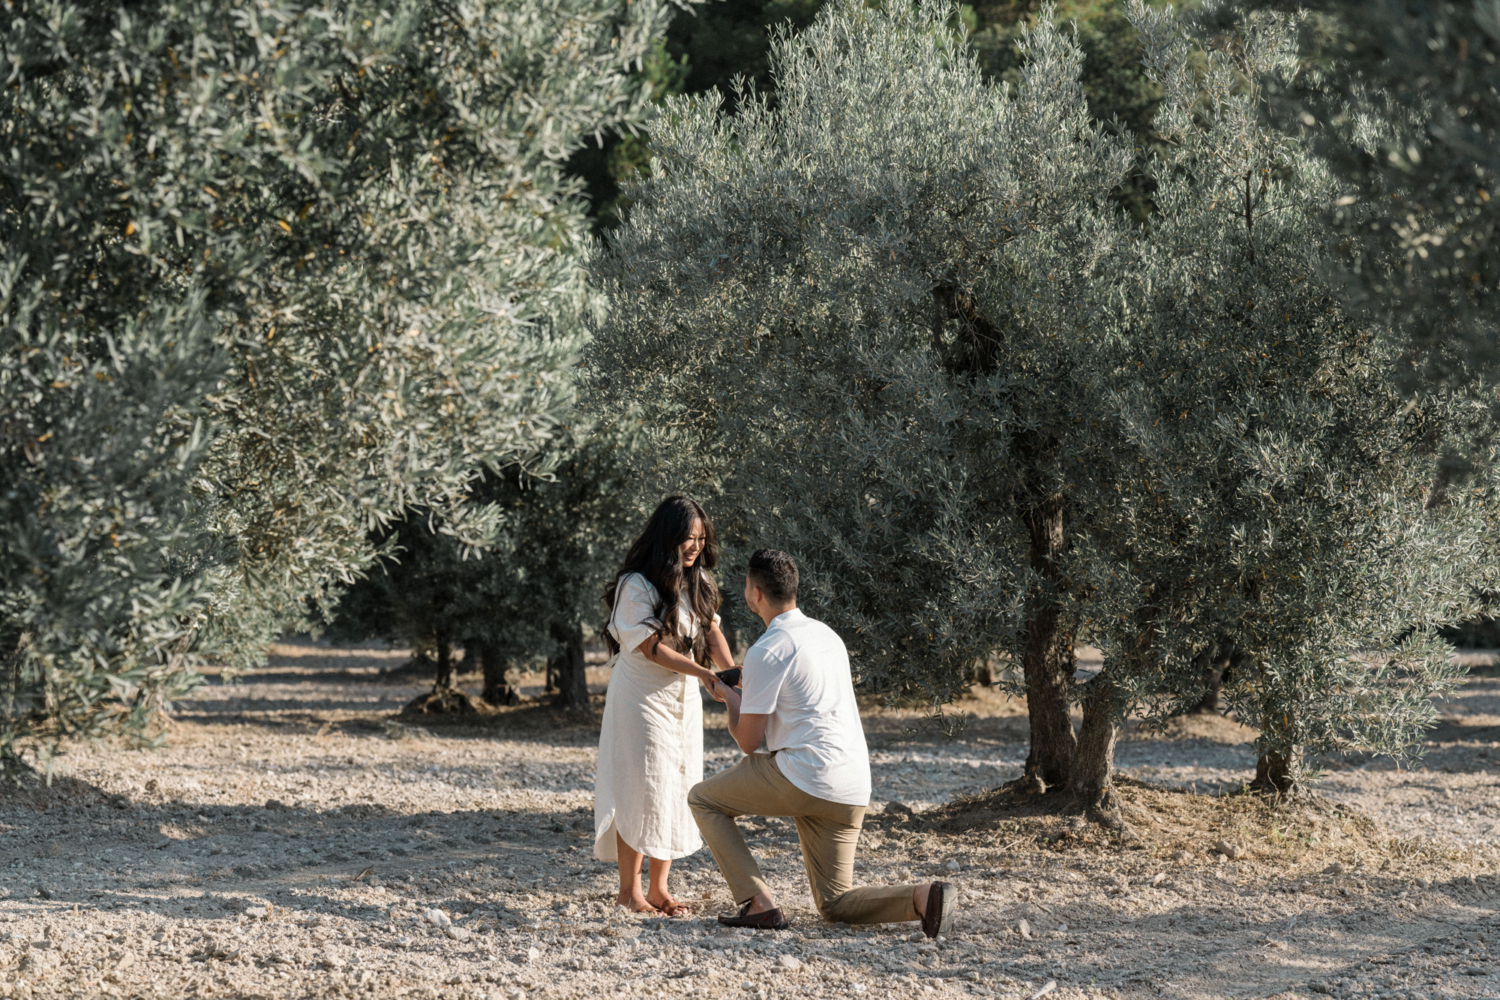 man on one knee proposes to woman in olive grove